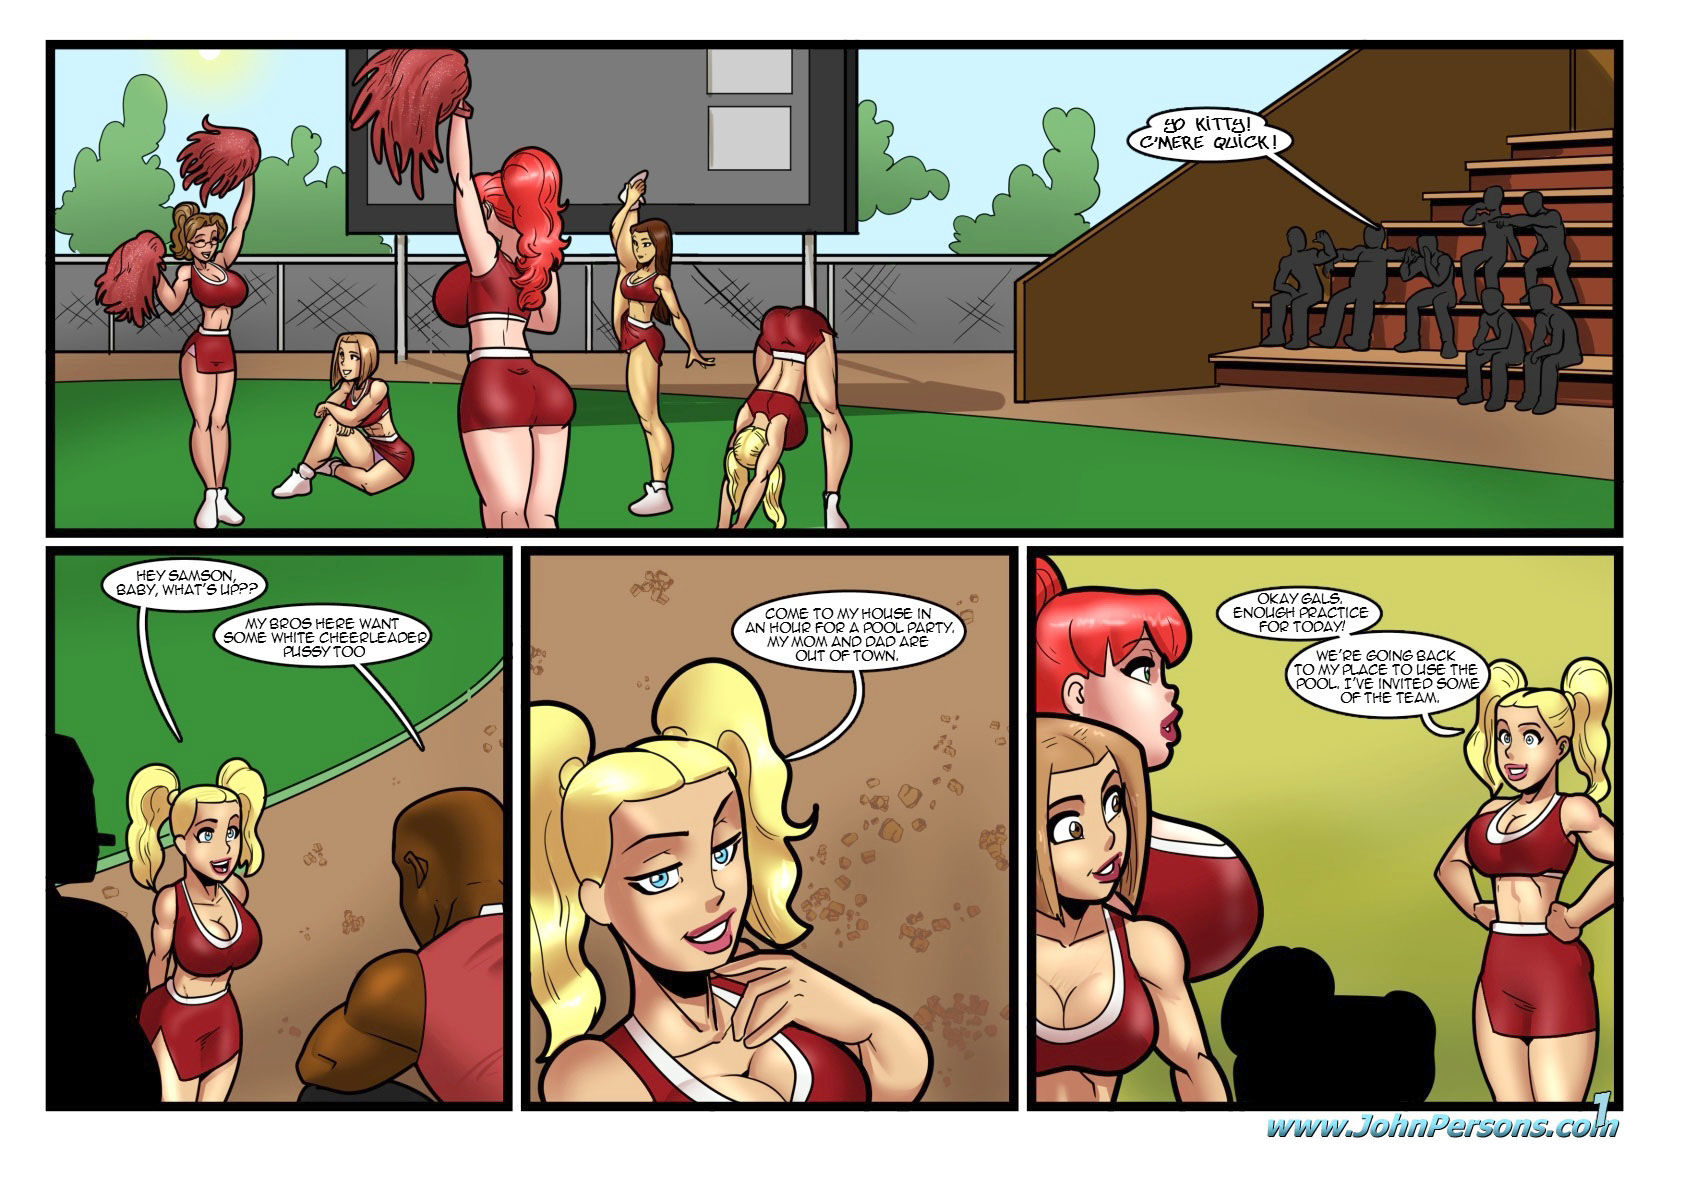 Pool Party Prologue - John Persons page 8